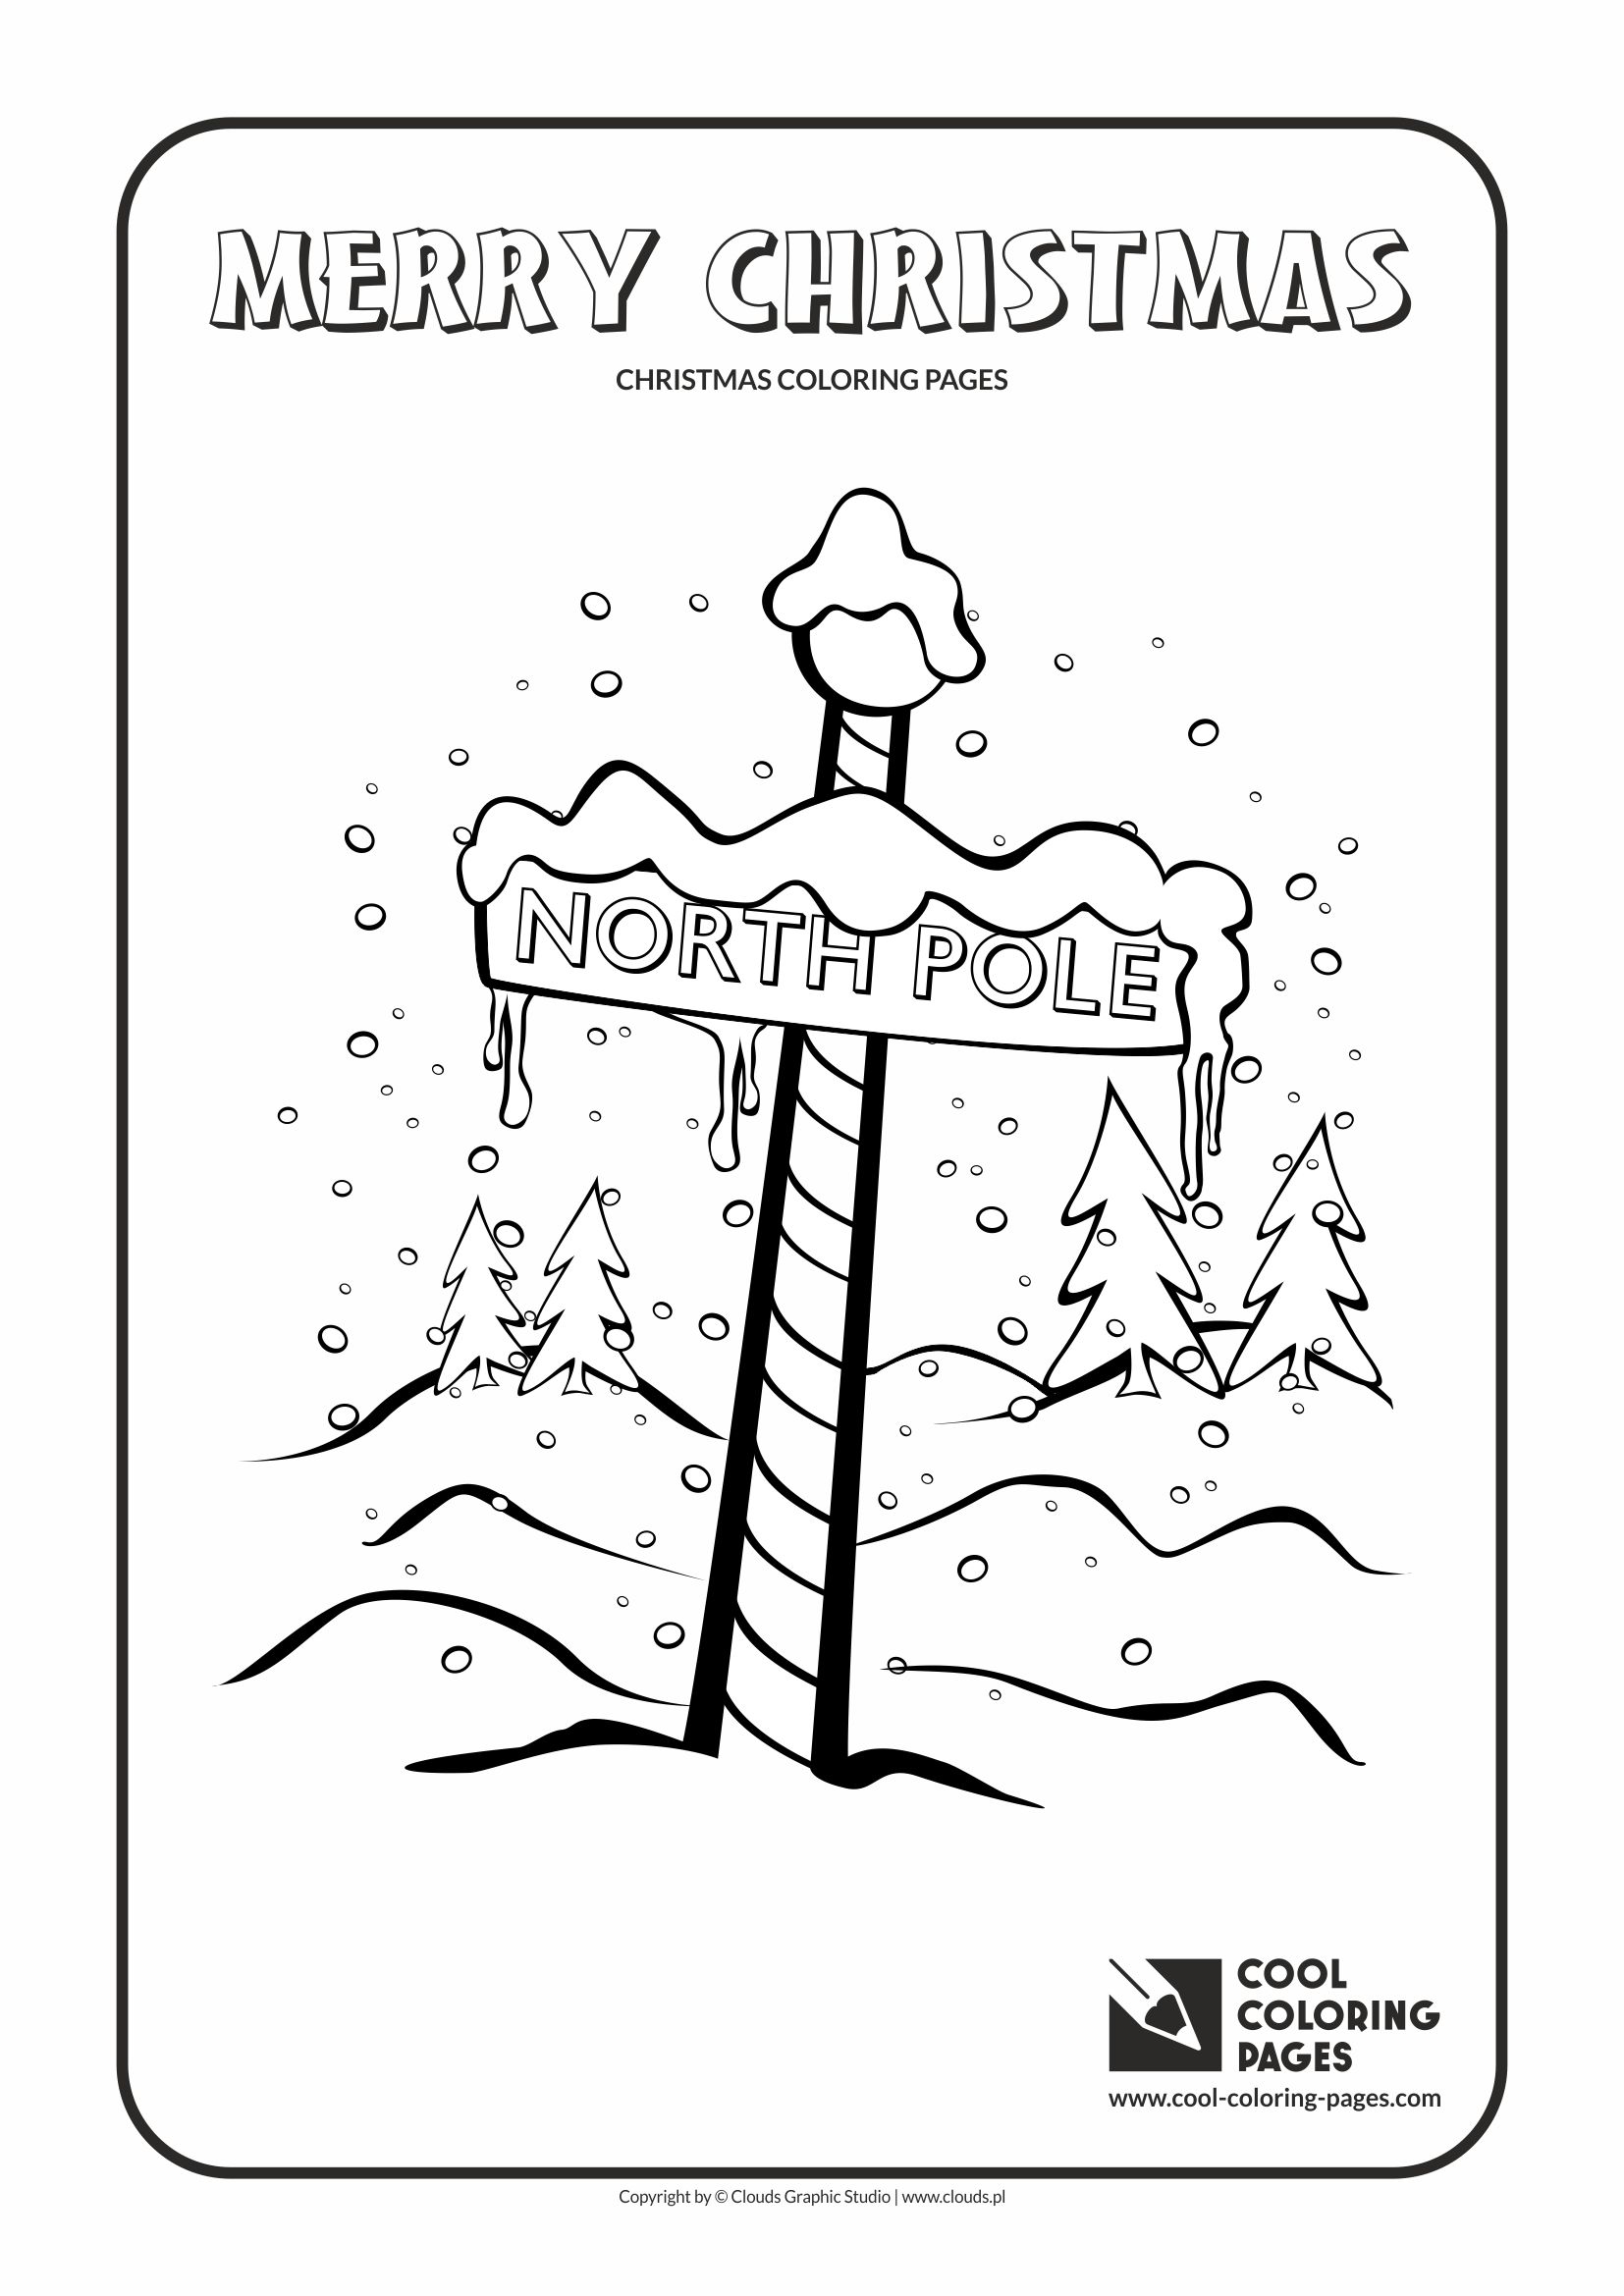 Cool Coloring Pages - Holidays / North Pole no 2 / Coloring page with North Pole no 2